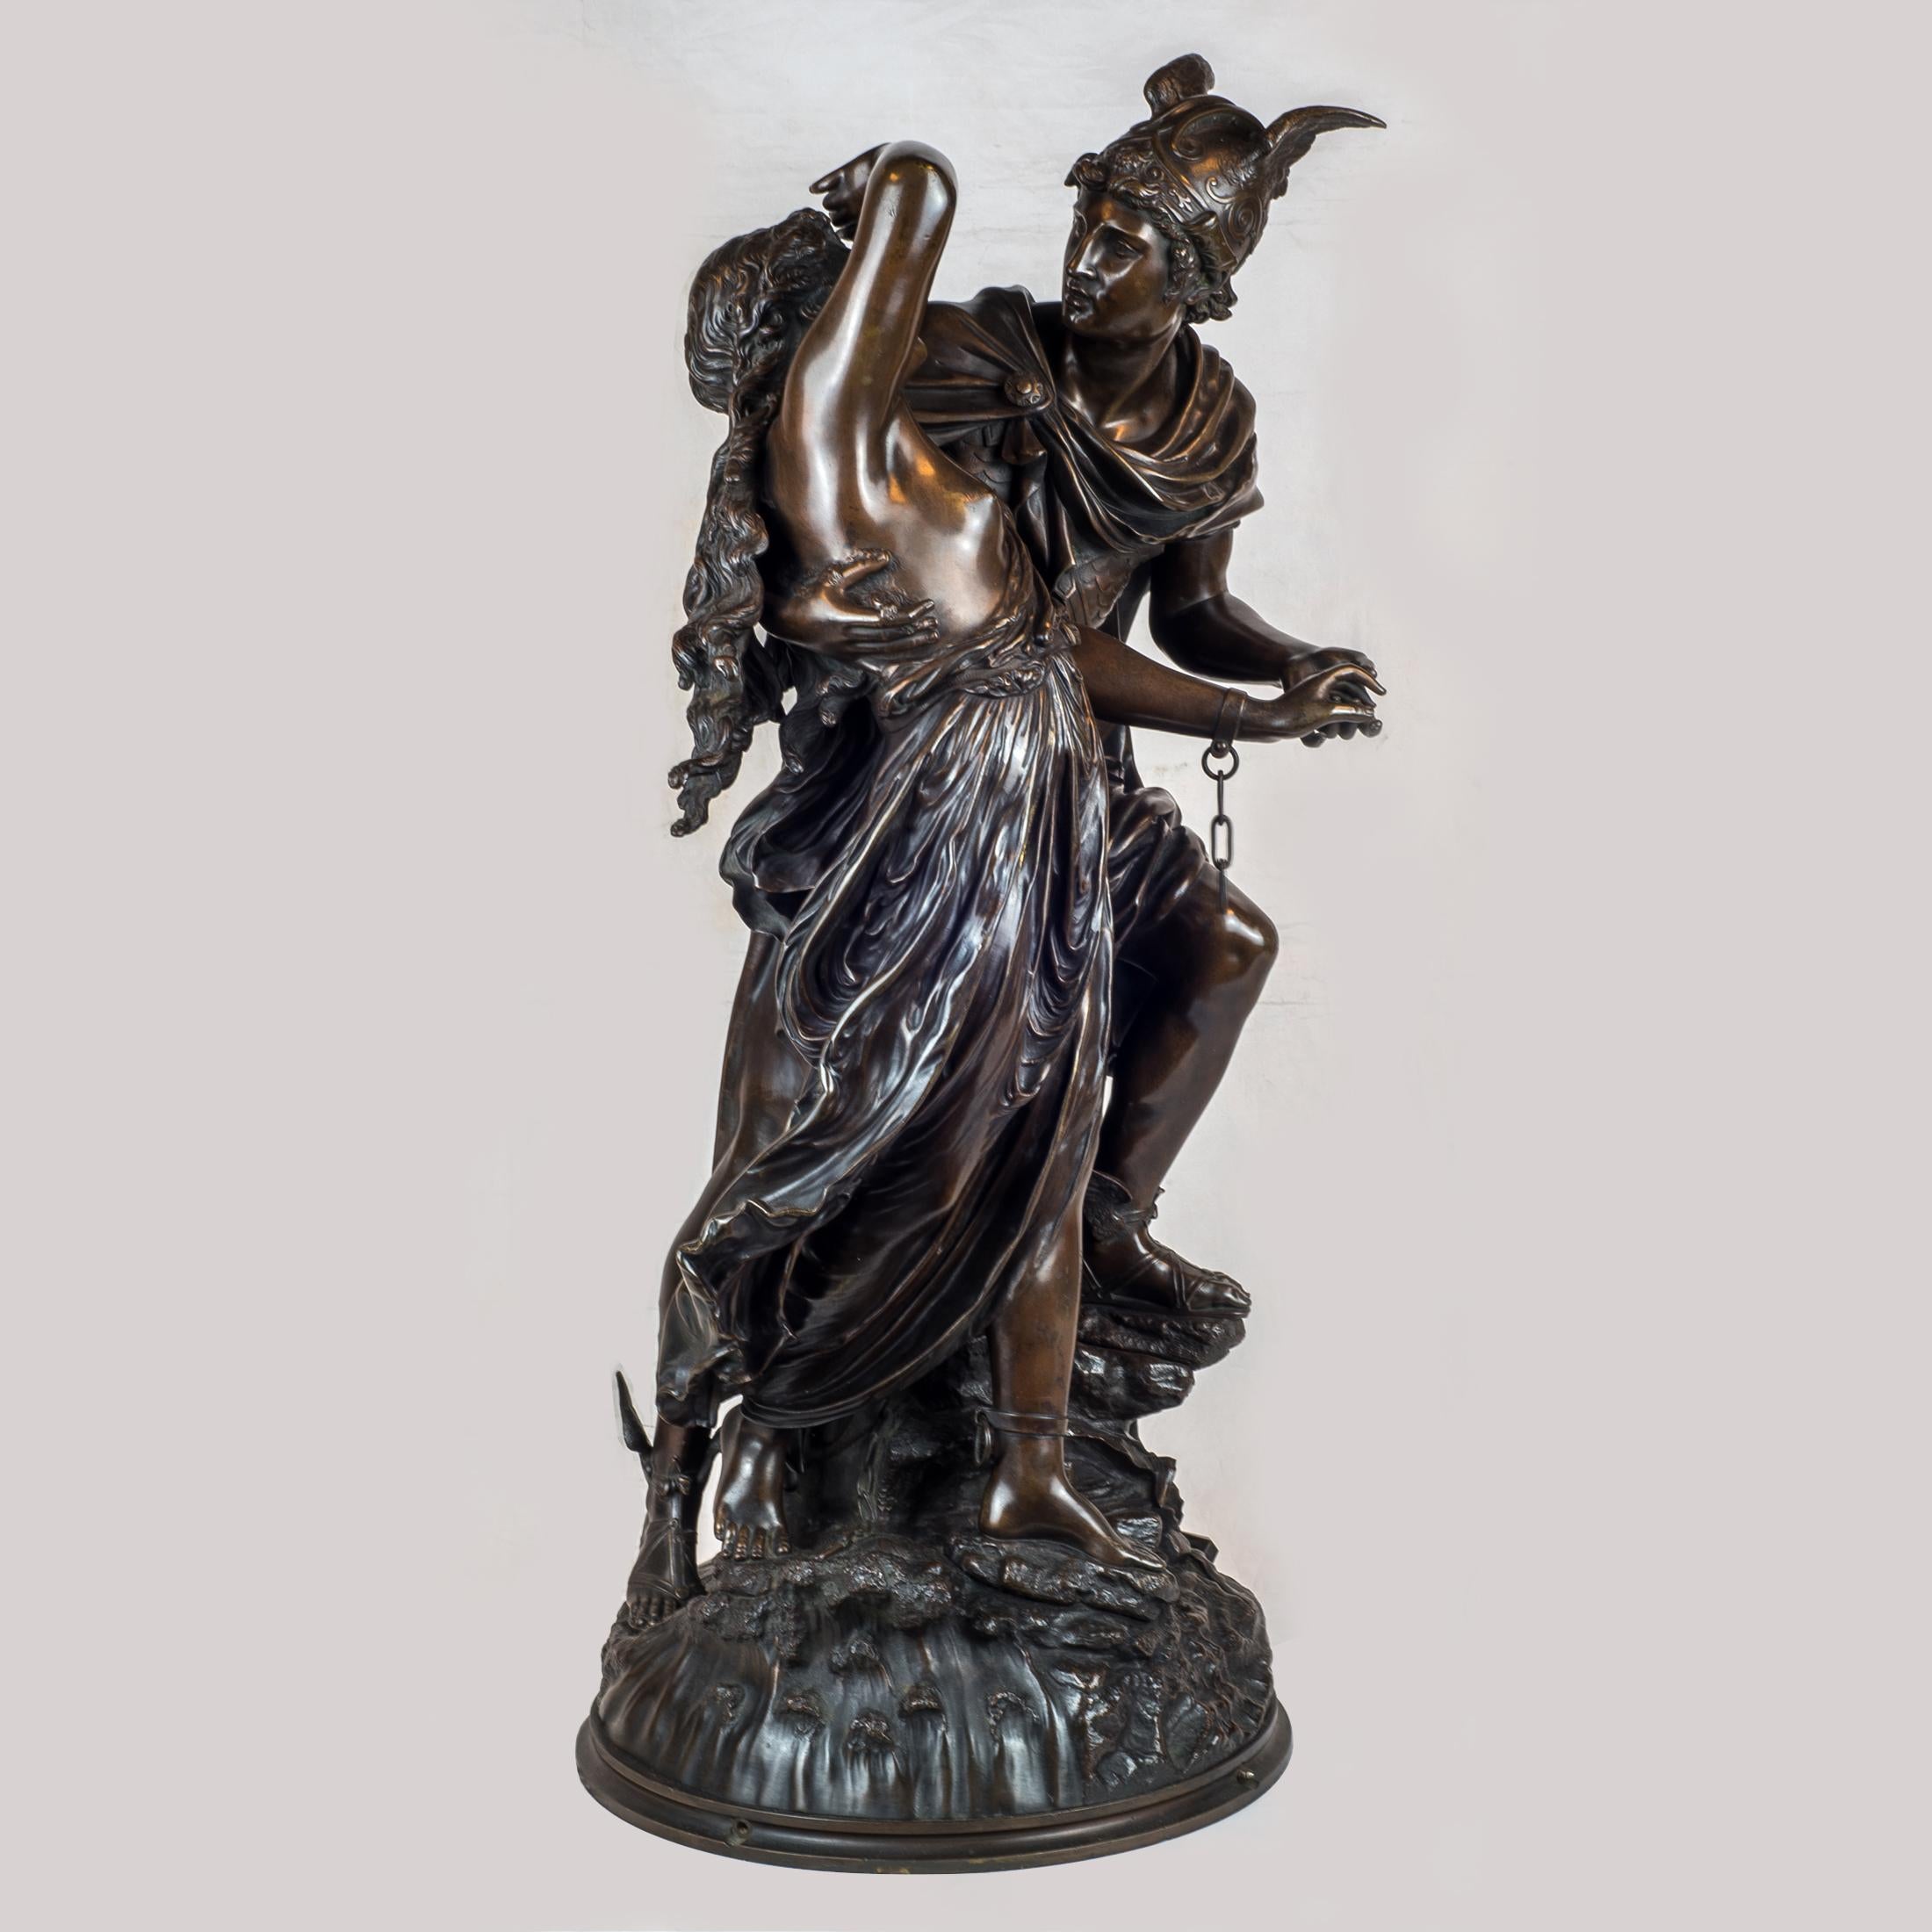 Jean-Léon Grégoire started to exhibit at the Salon in 1867. He was famous for his high quality chiseled finish of his bronze figures as seen in his most well-known works, L'Allegro, Mozart infant, and Perseus and Andromeda.
signed L.